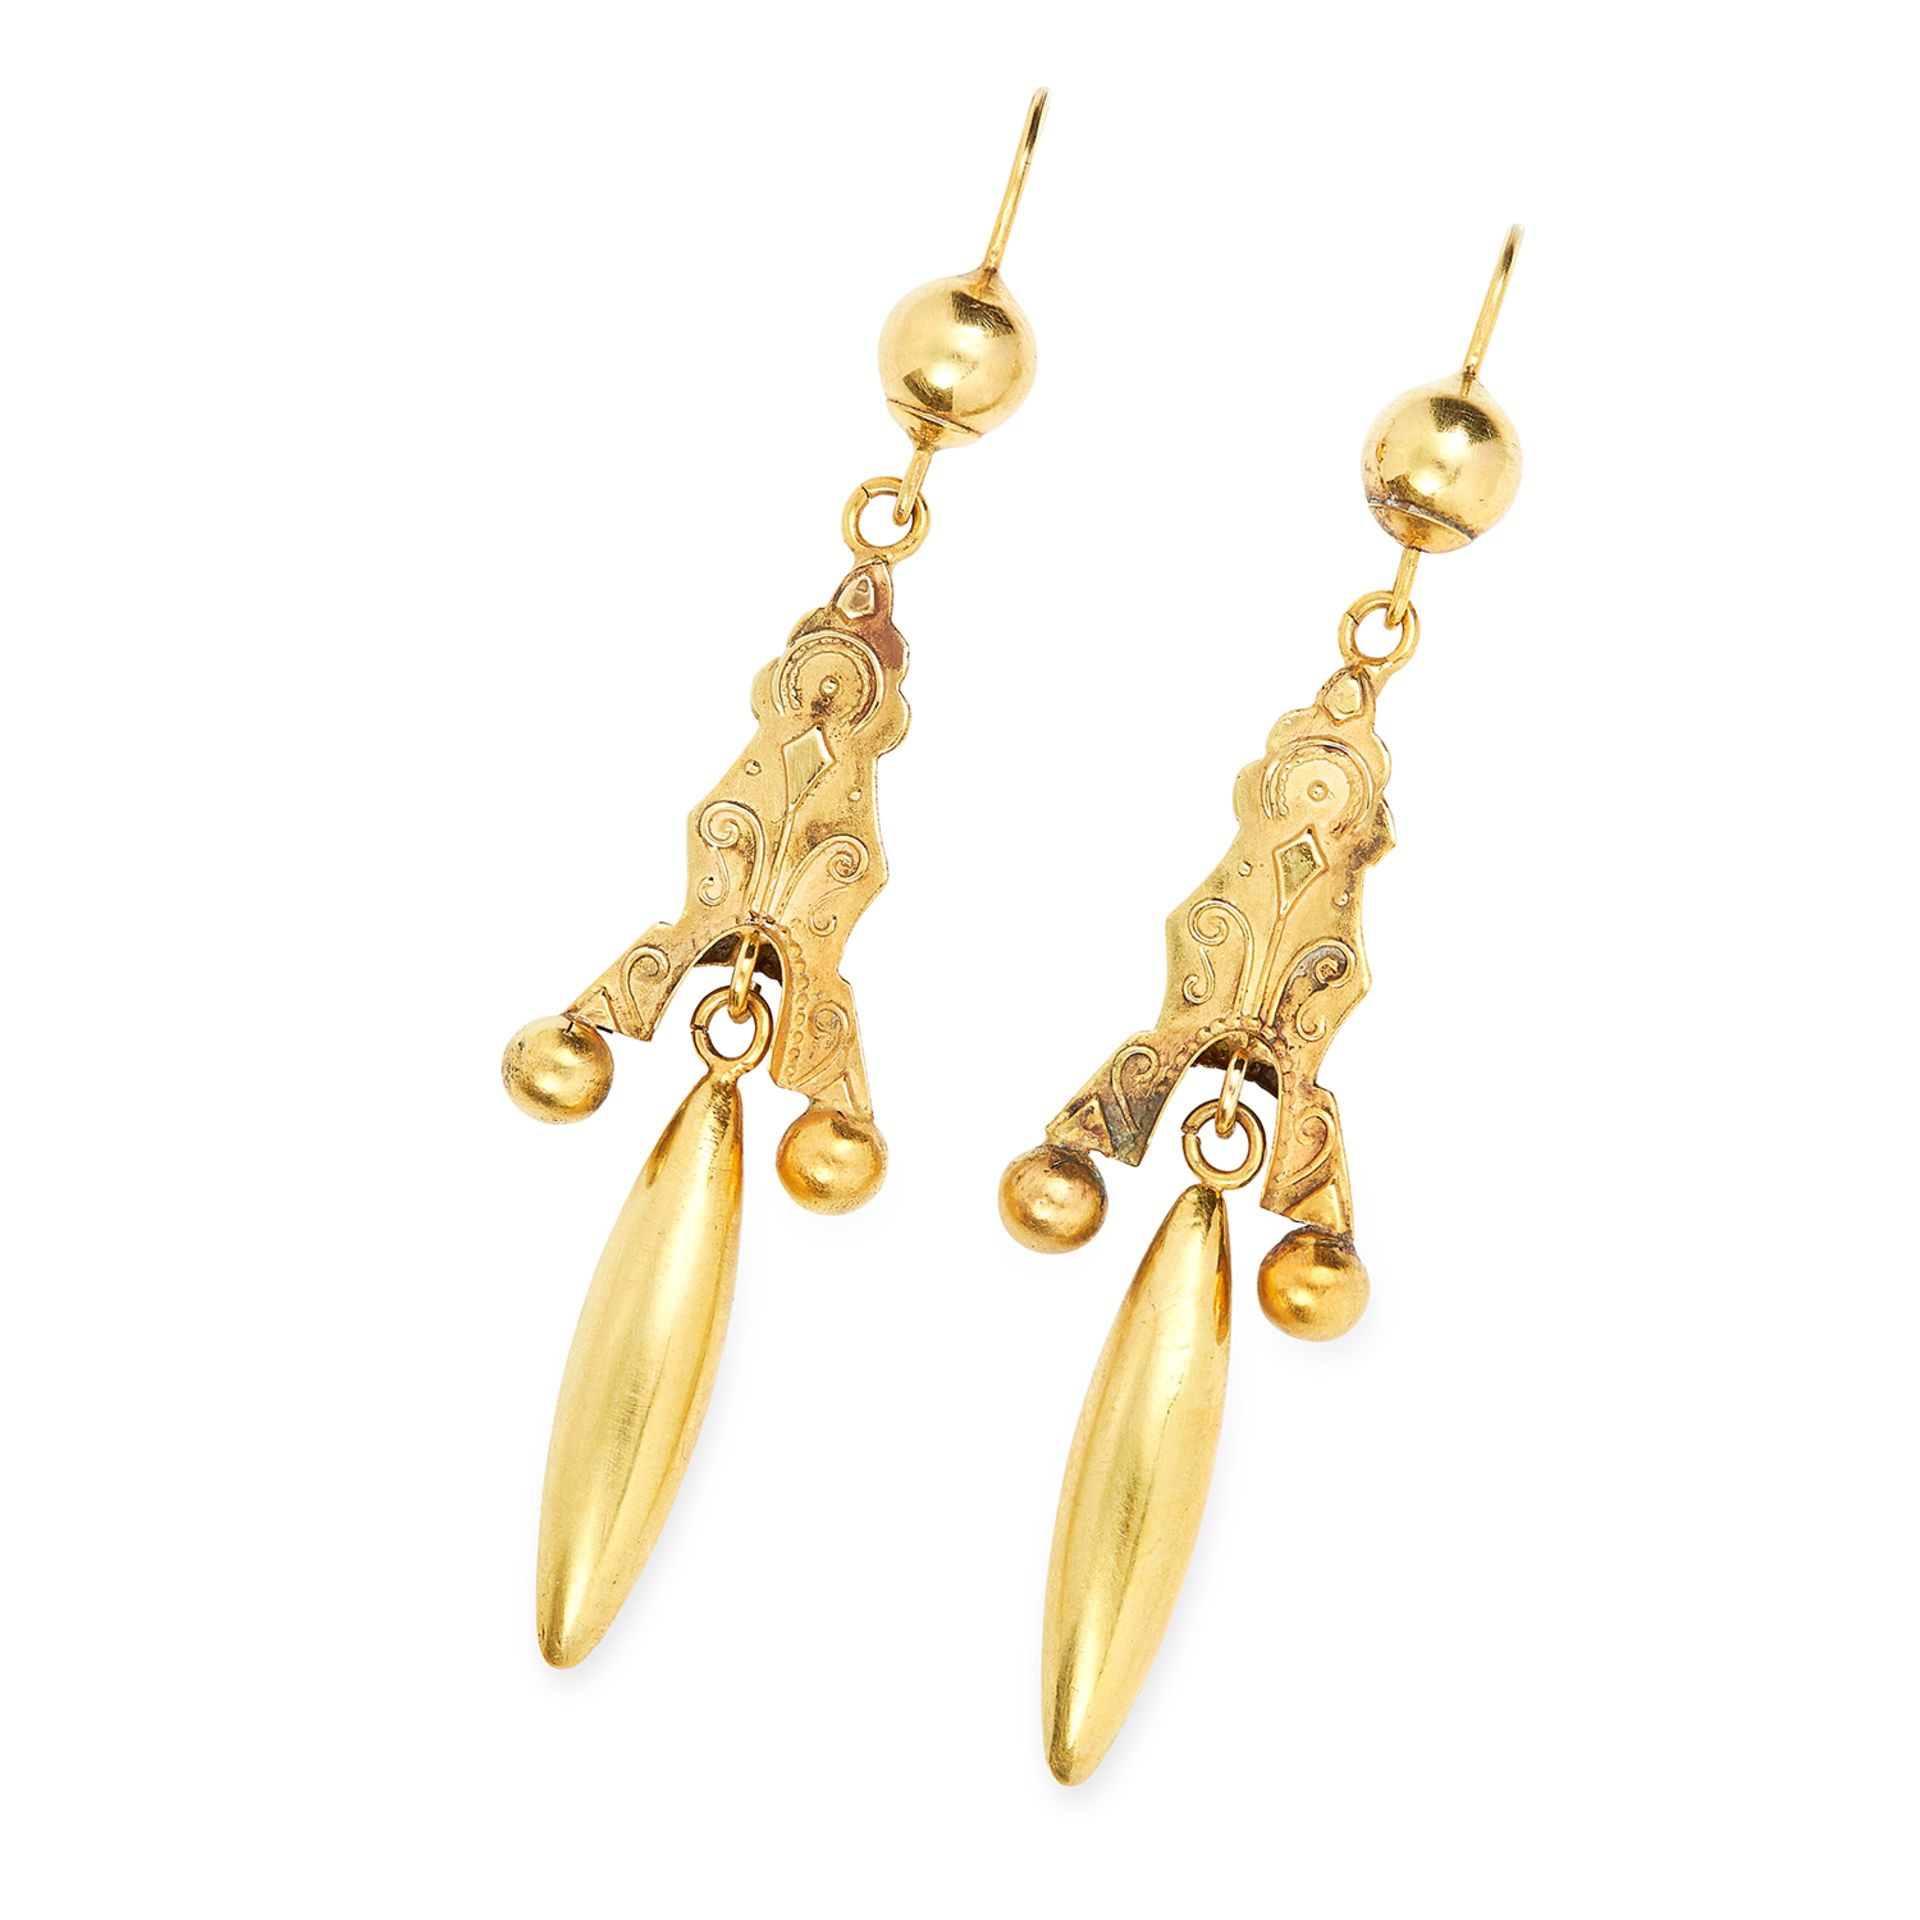 ANTIQUE ARTICULATED DROP EARRINGS, 19TH CENTURY 6.0cm, 3.1g.